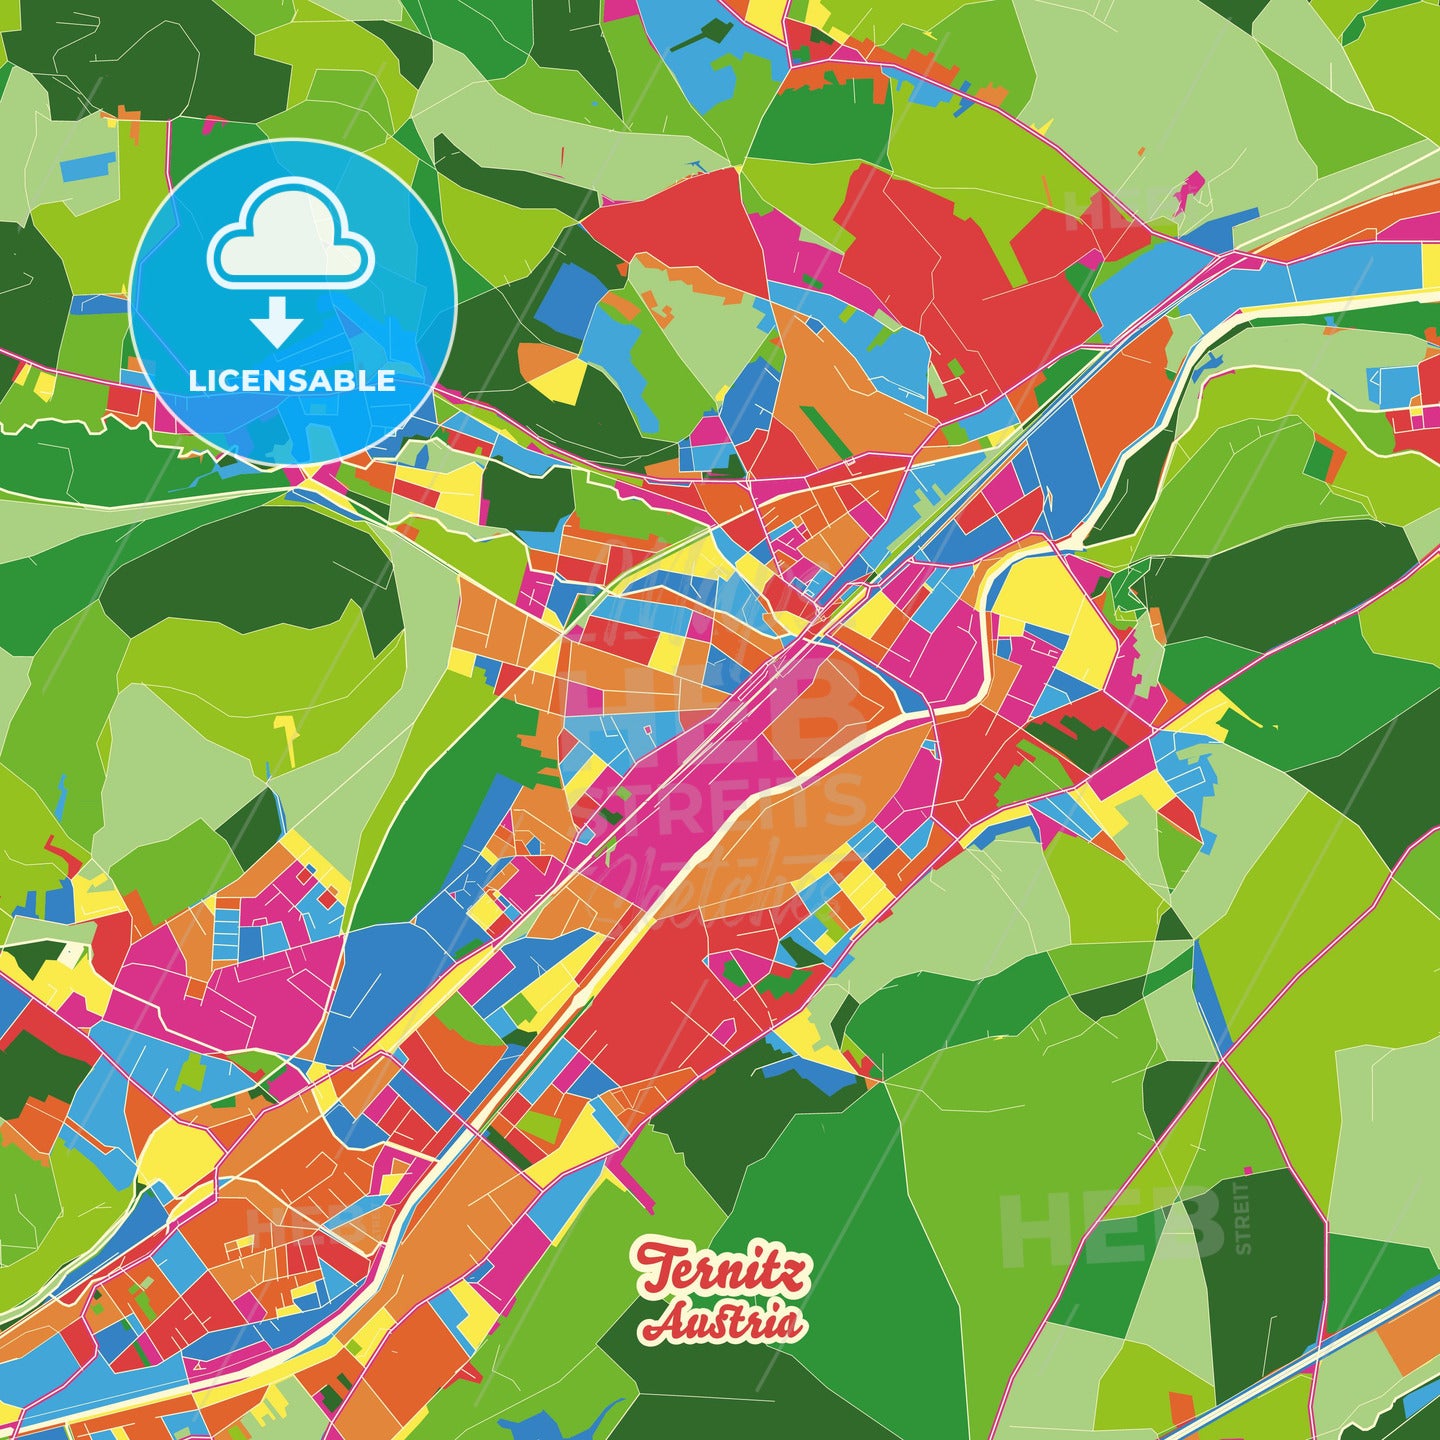 Ternitz, Austria Crazy Colorful Street Map Poster Template - HEBSTREITS Sketches